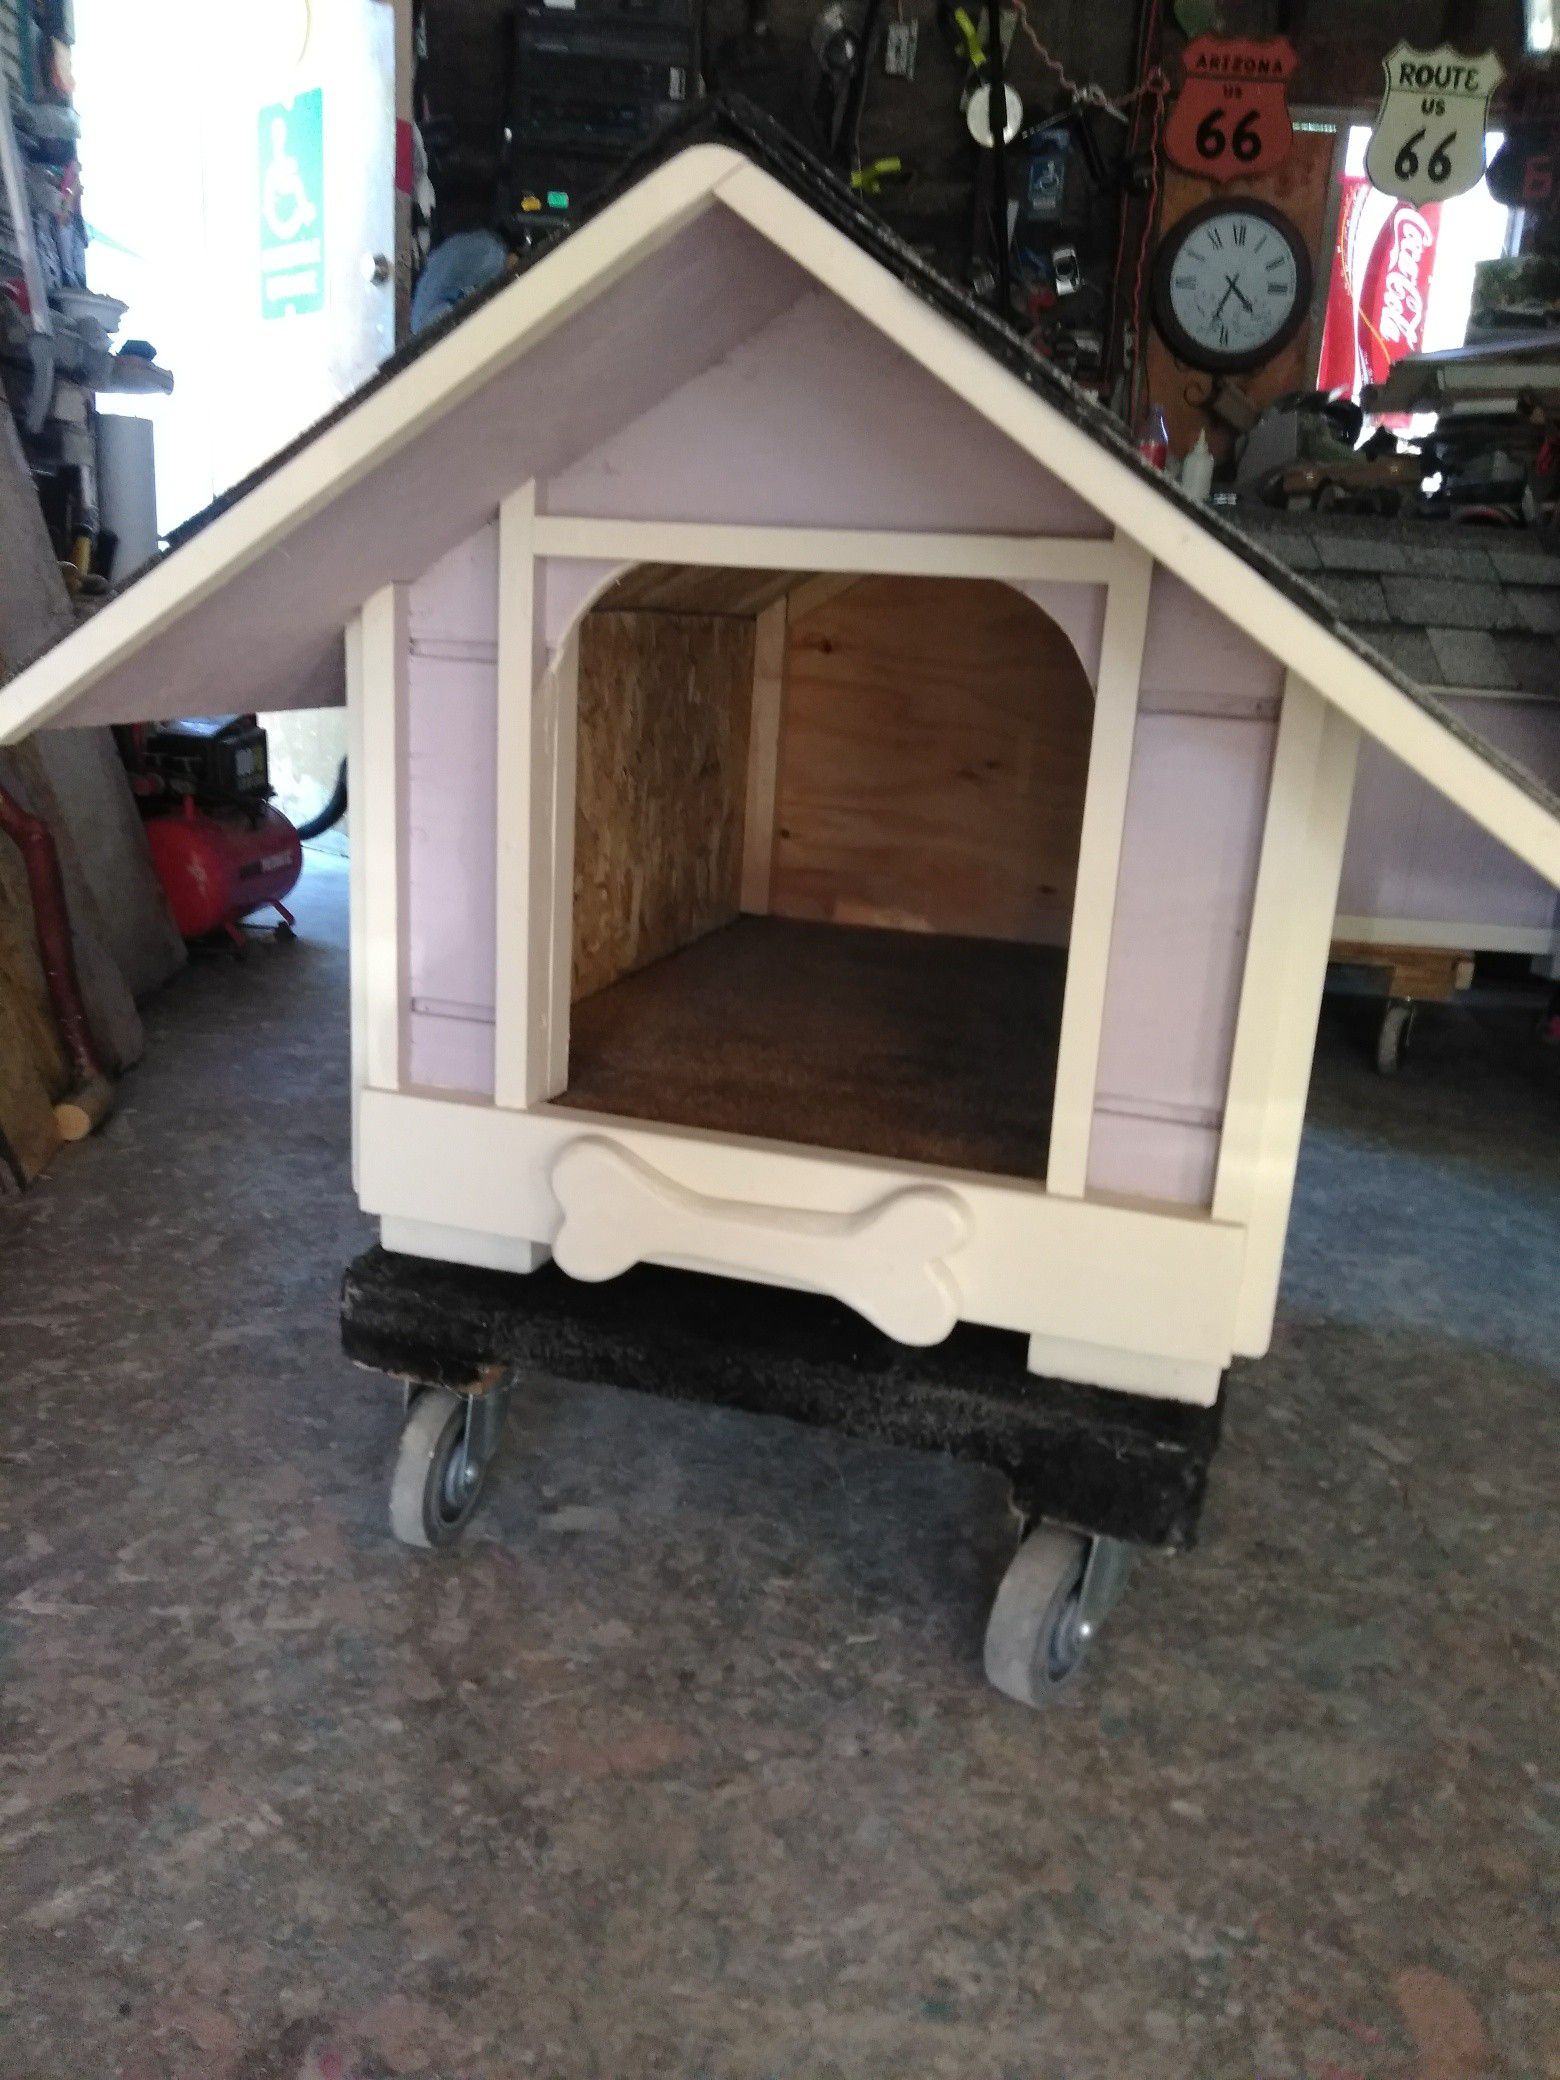 New doghouse small size $45 firm